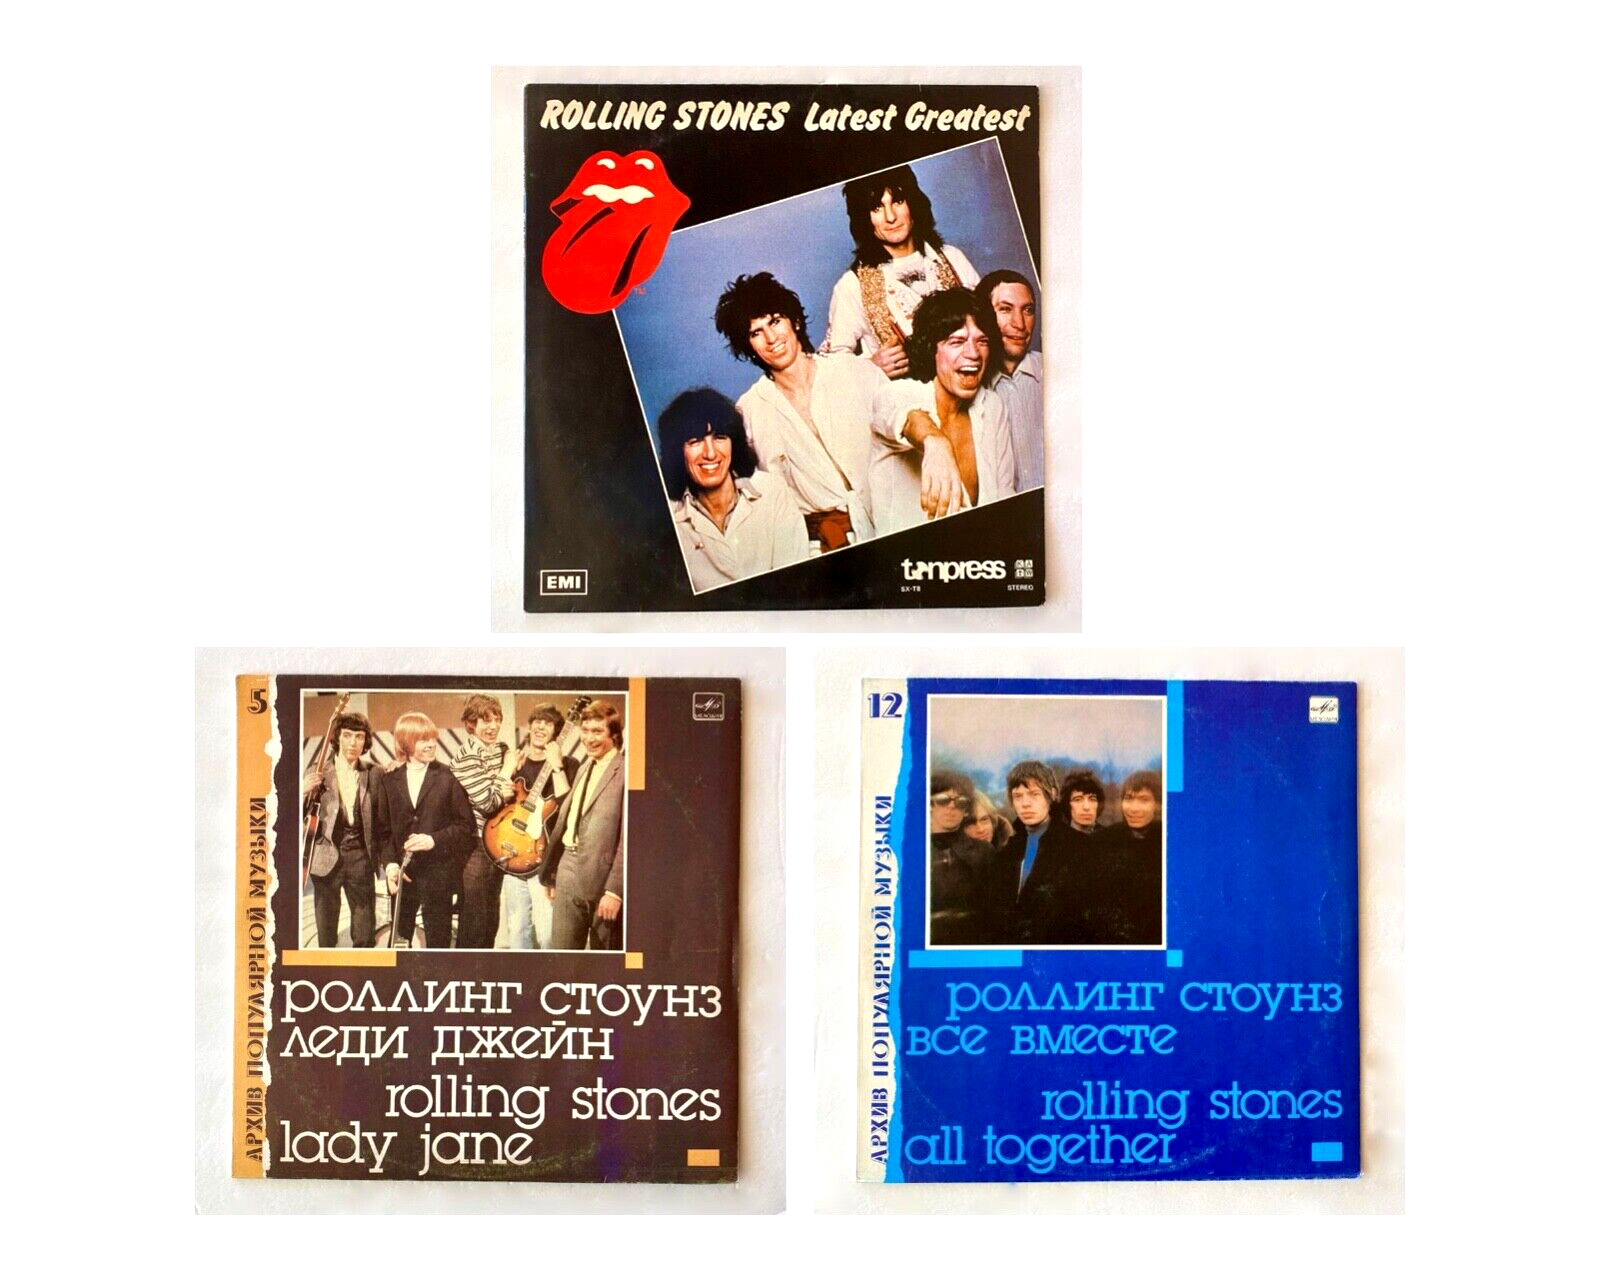 RARE Rolling Stones Latest Greatest SX-T8 + All Together & Lady Jane (USSR)